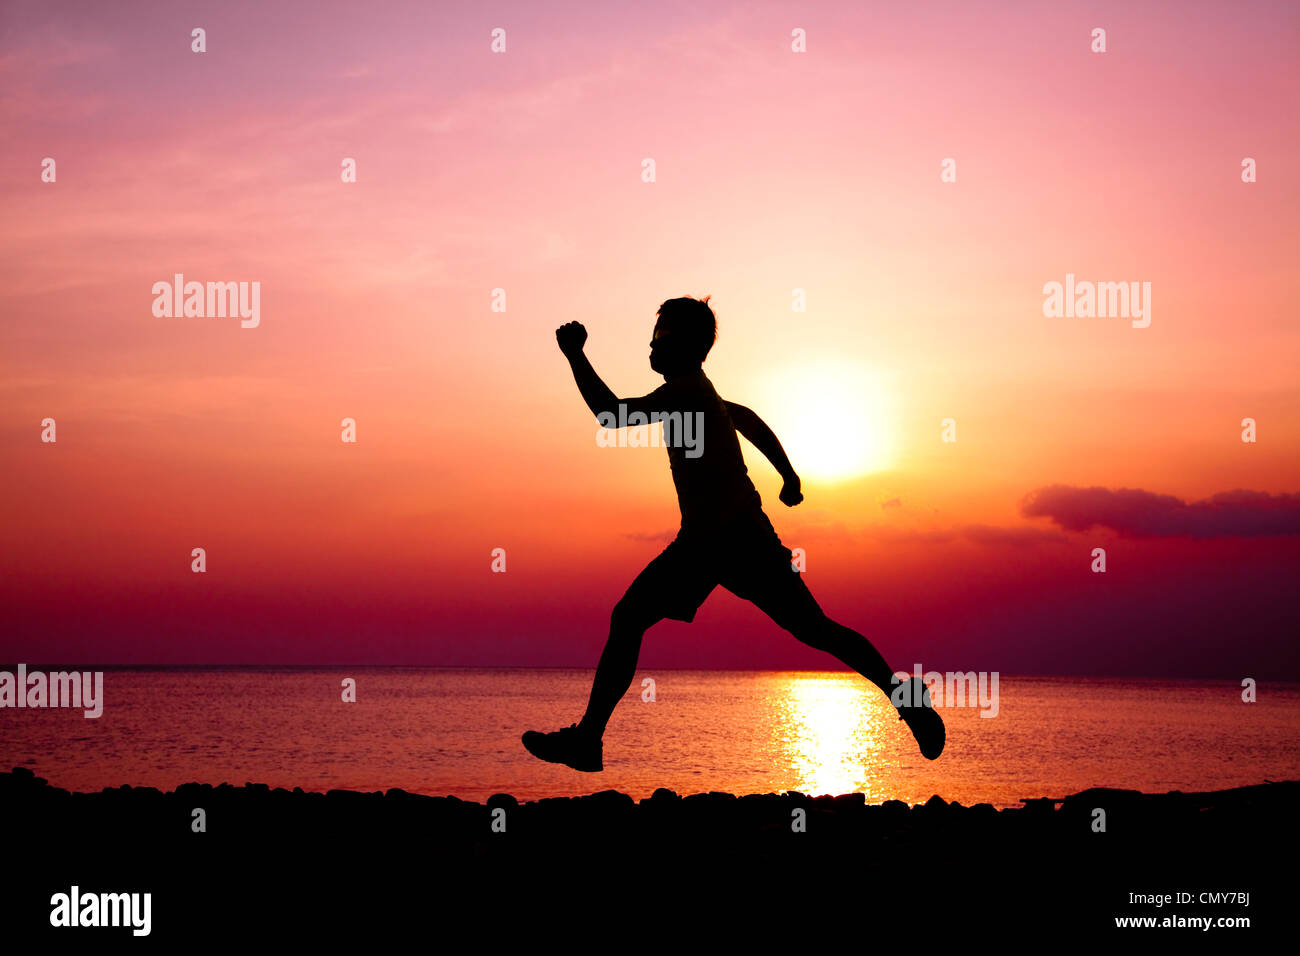 The Silhouette of runner on the beach Stock Photo